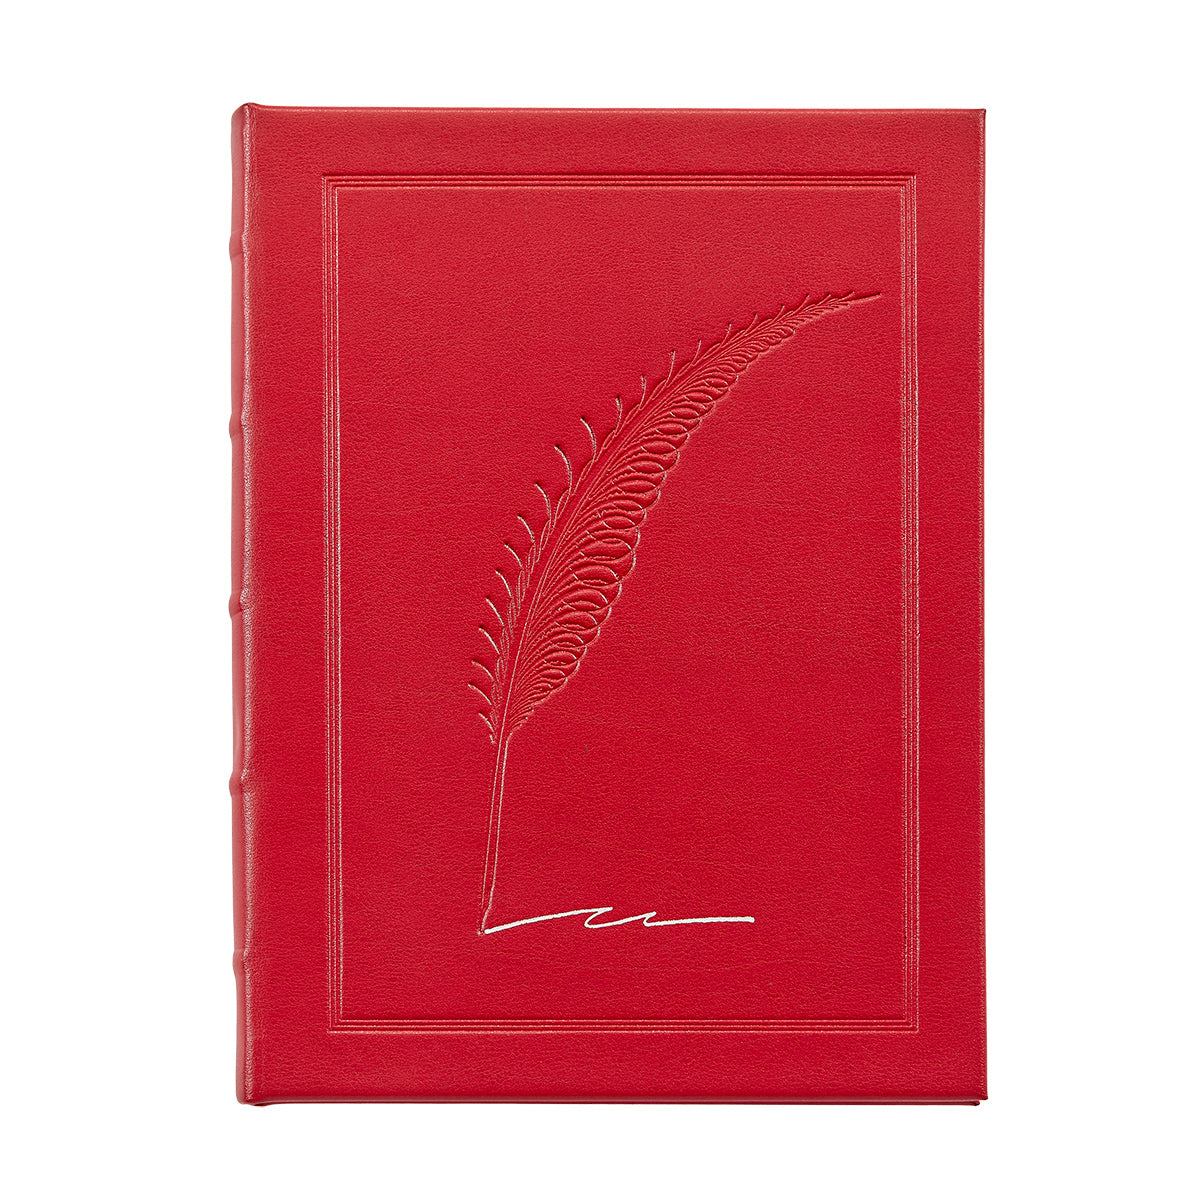 Graphic Image 9" Hardcover Journal Red Bonded Leather